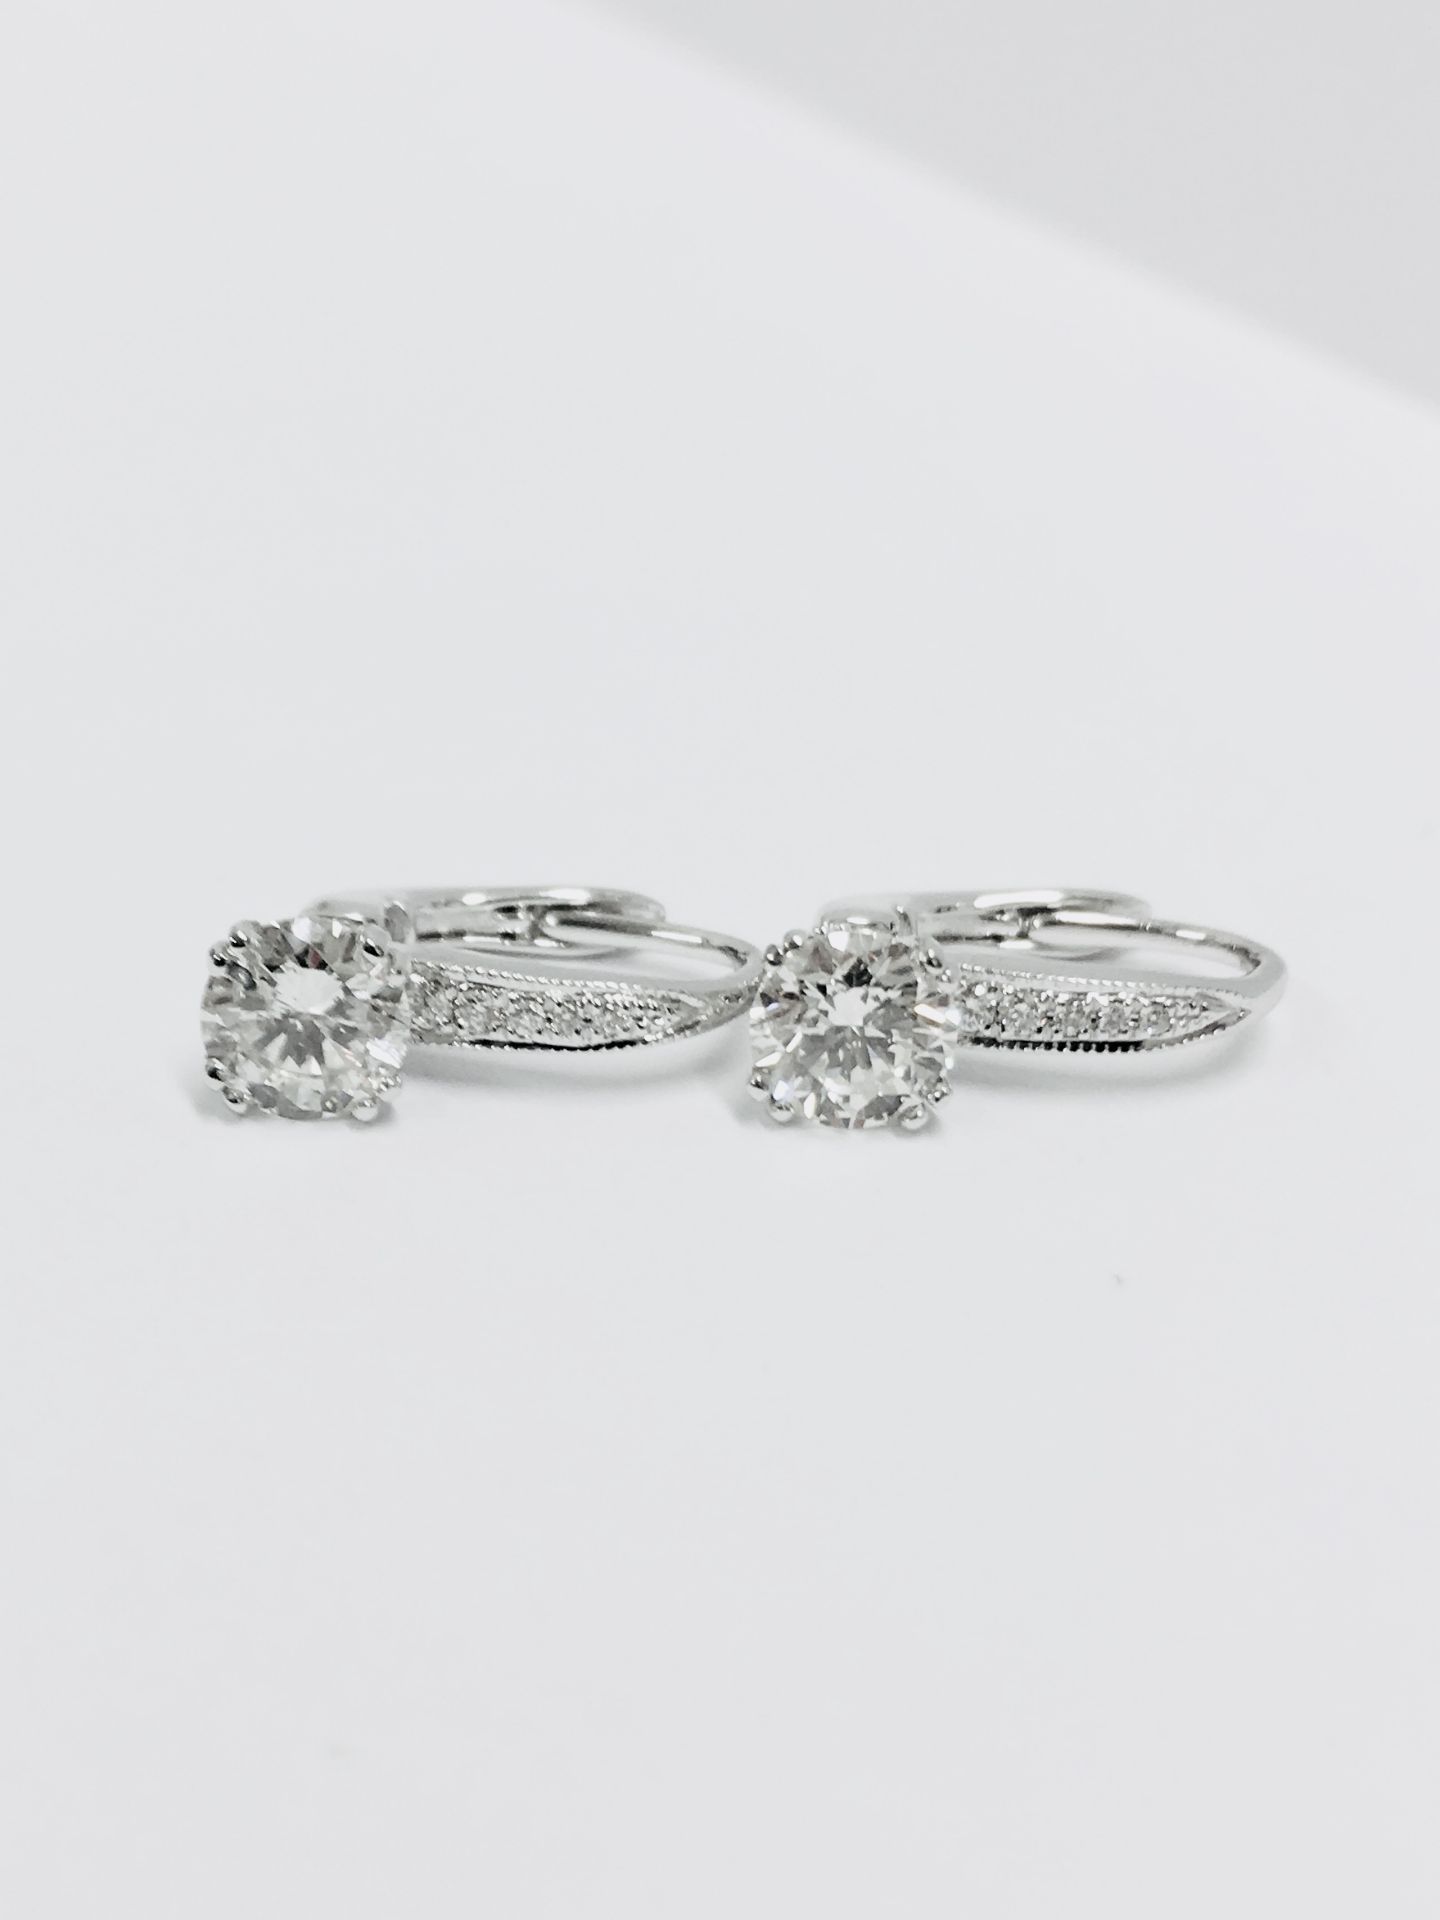 18Ct White Gold Hoop Style Earrings With Hinge Fastners. - Image 6 of 22